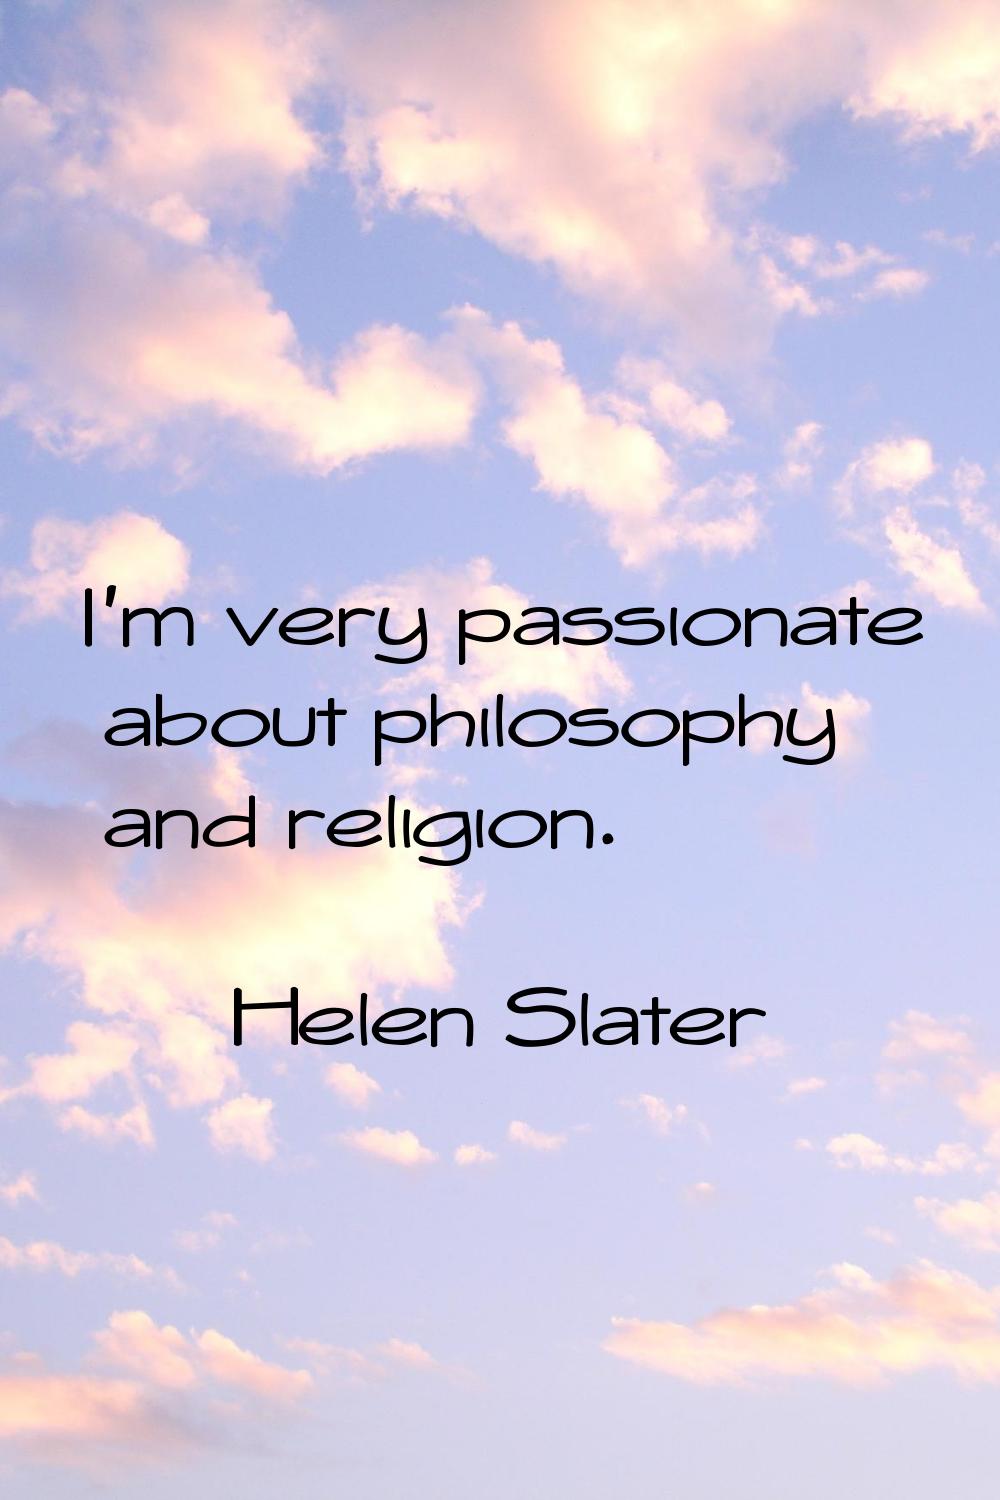 I'm very passionate about philosophy and religion.